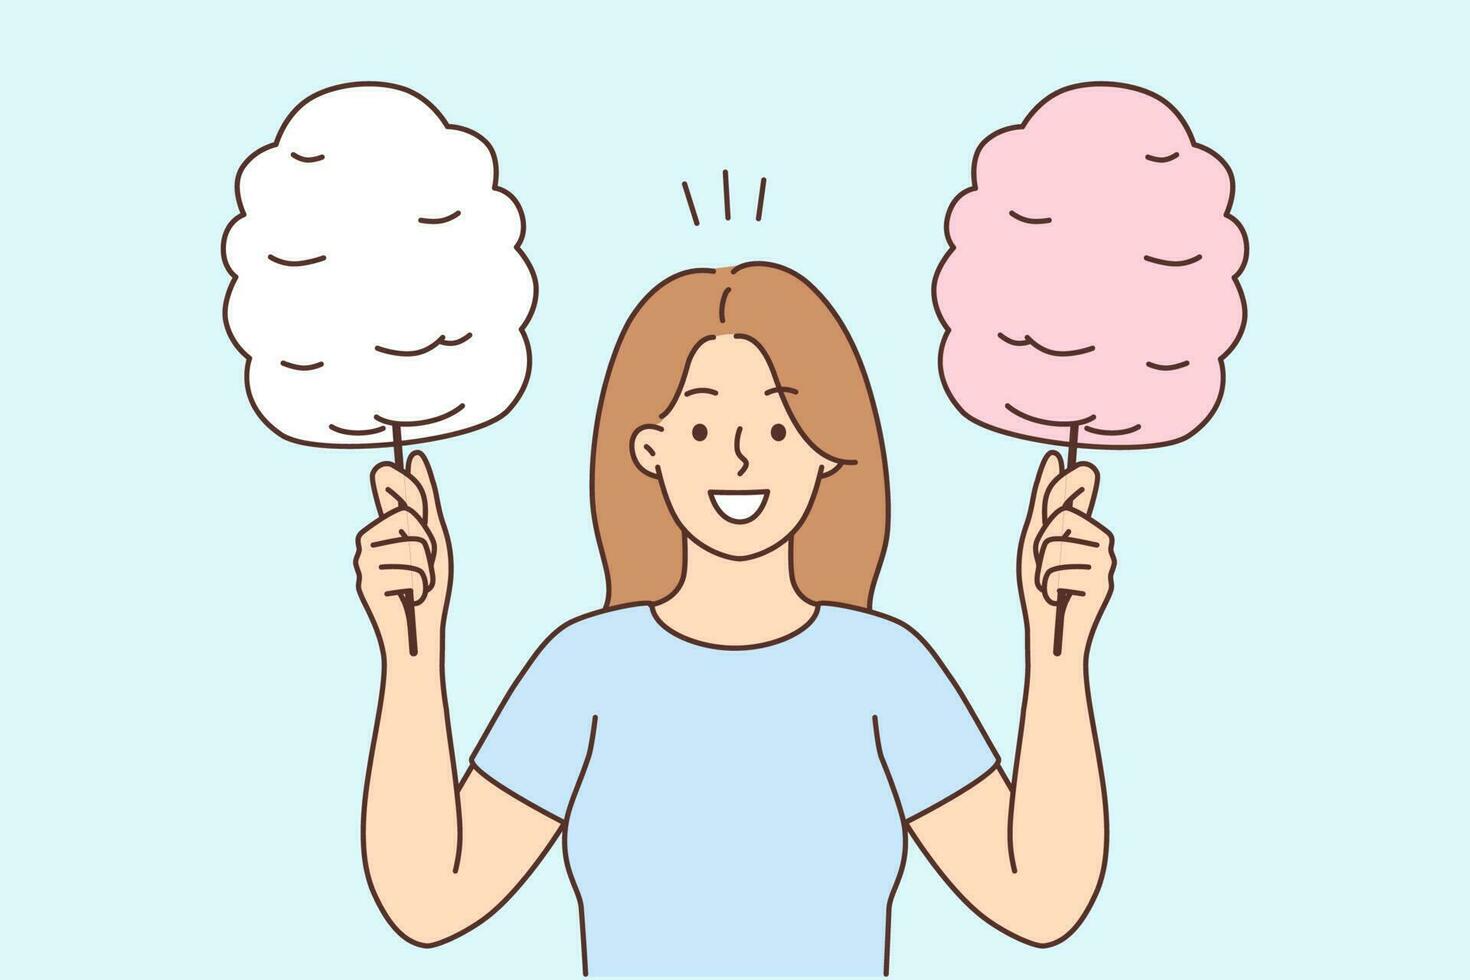 Smiling young woman holding cotton candy on sticks. Happy girl with sweet sugar snack. Delicious park food concept. Vector illustration.